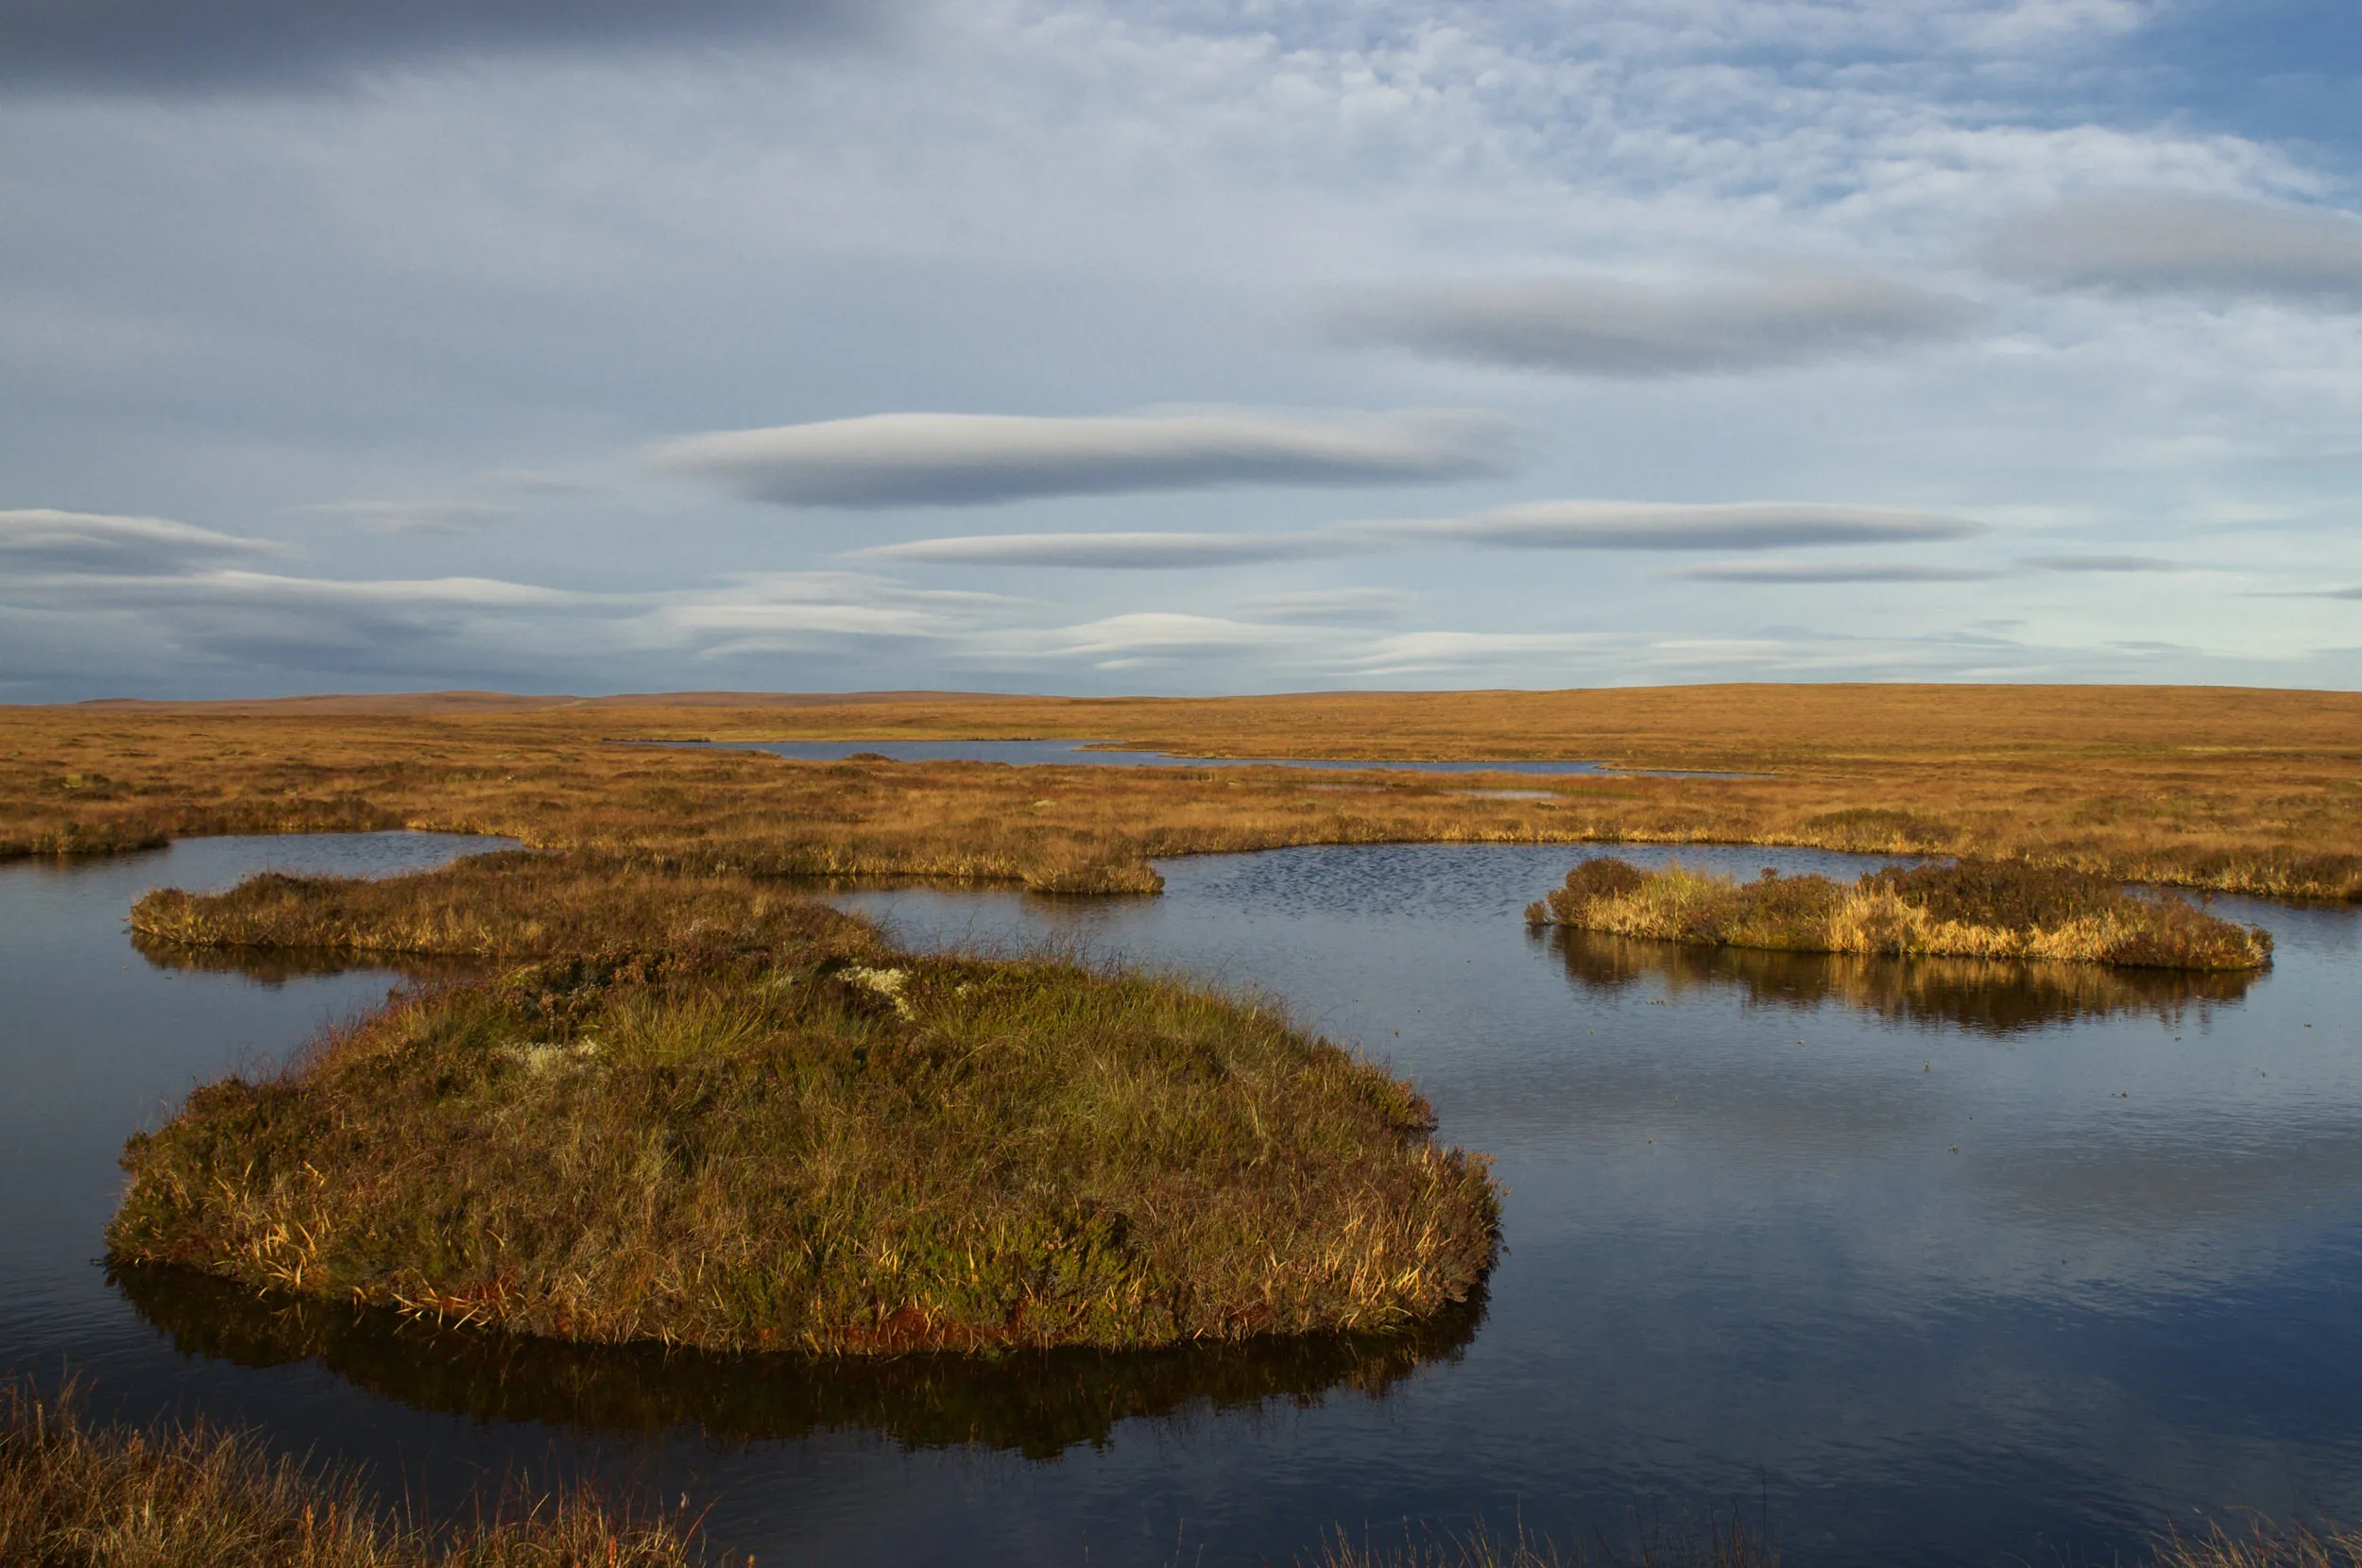 Peat islands sit in a large pool system, surrounded by water.